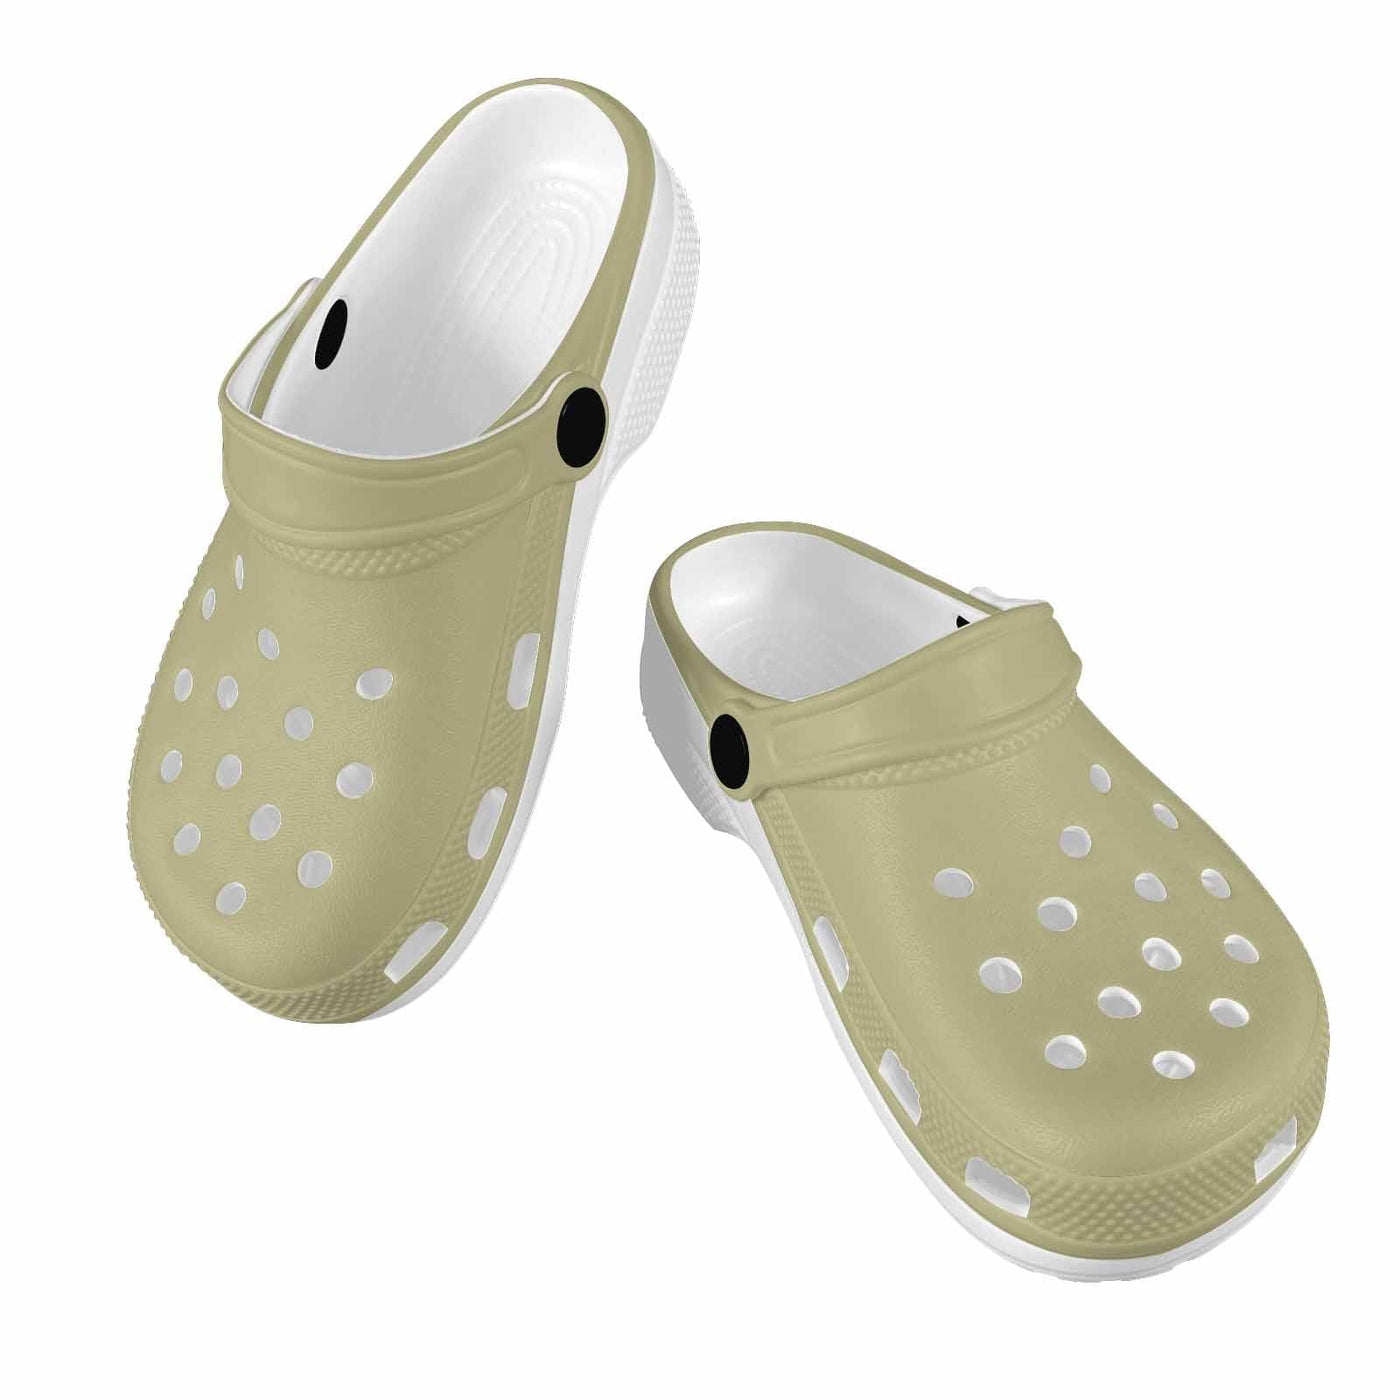 Sage Green Kids Clogs - Unisex | Clogs | Youth